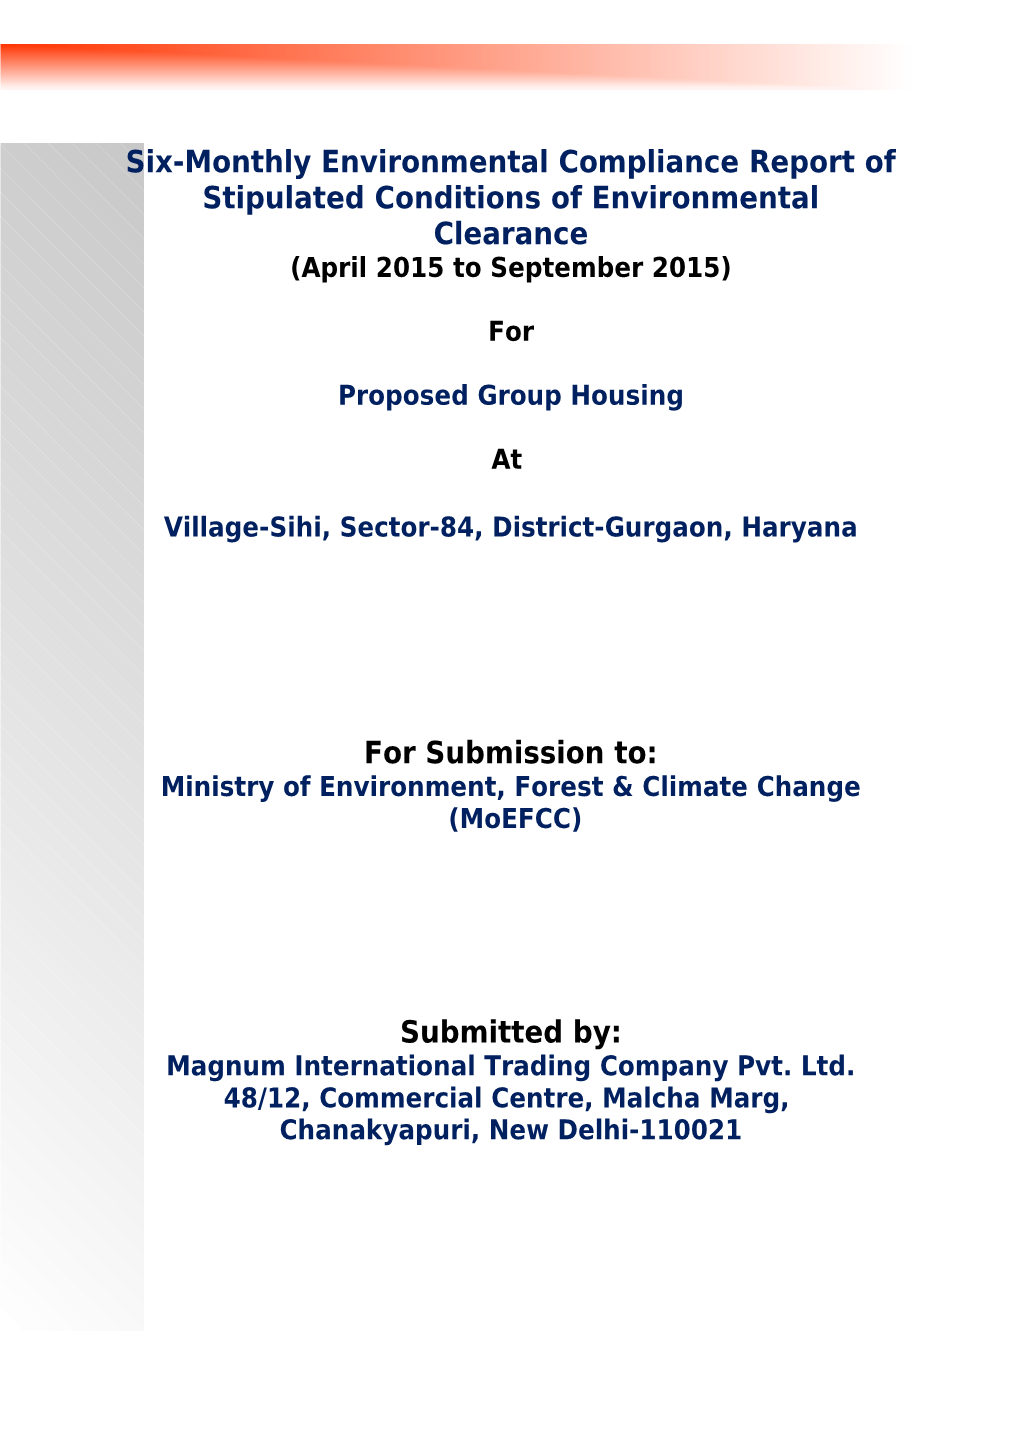 Project: Proposed Group Housing Project at Village-Sihi, Sector-84, Gurgaon, Haryana